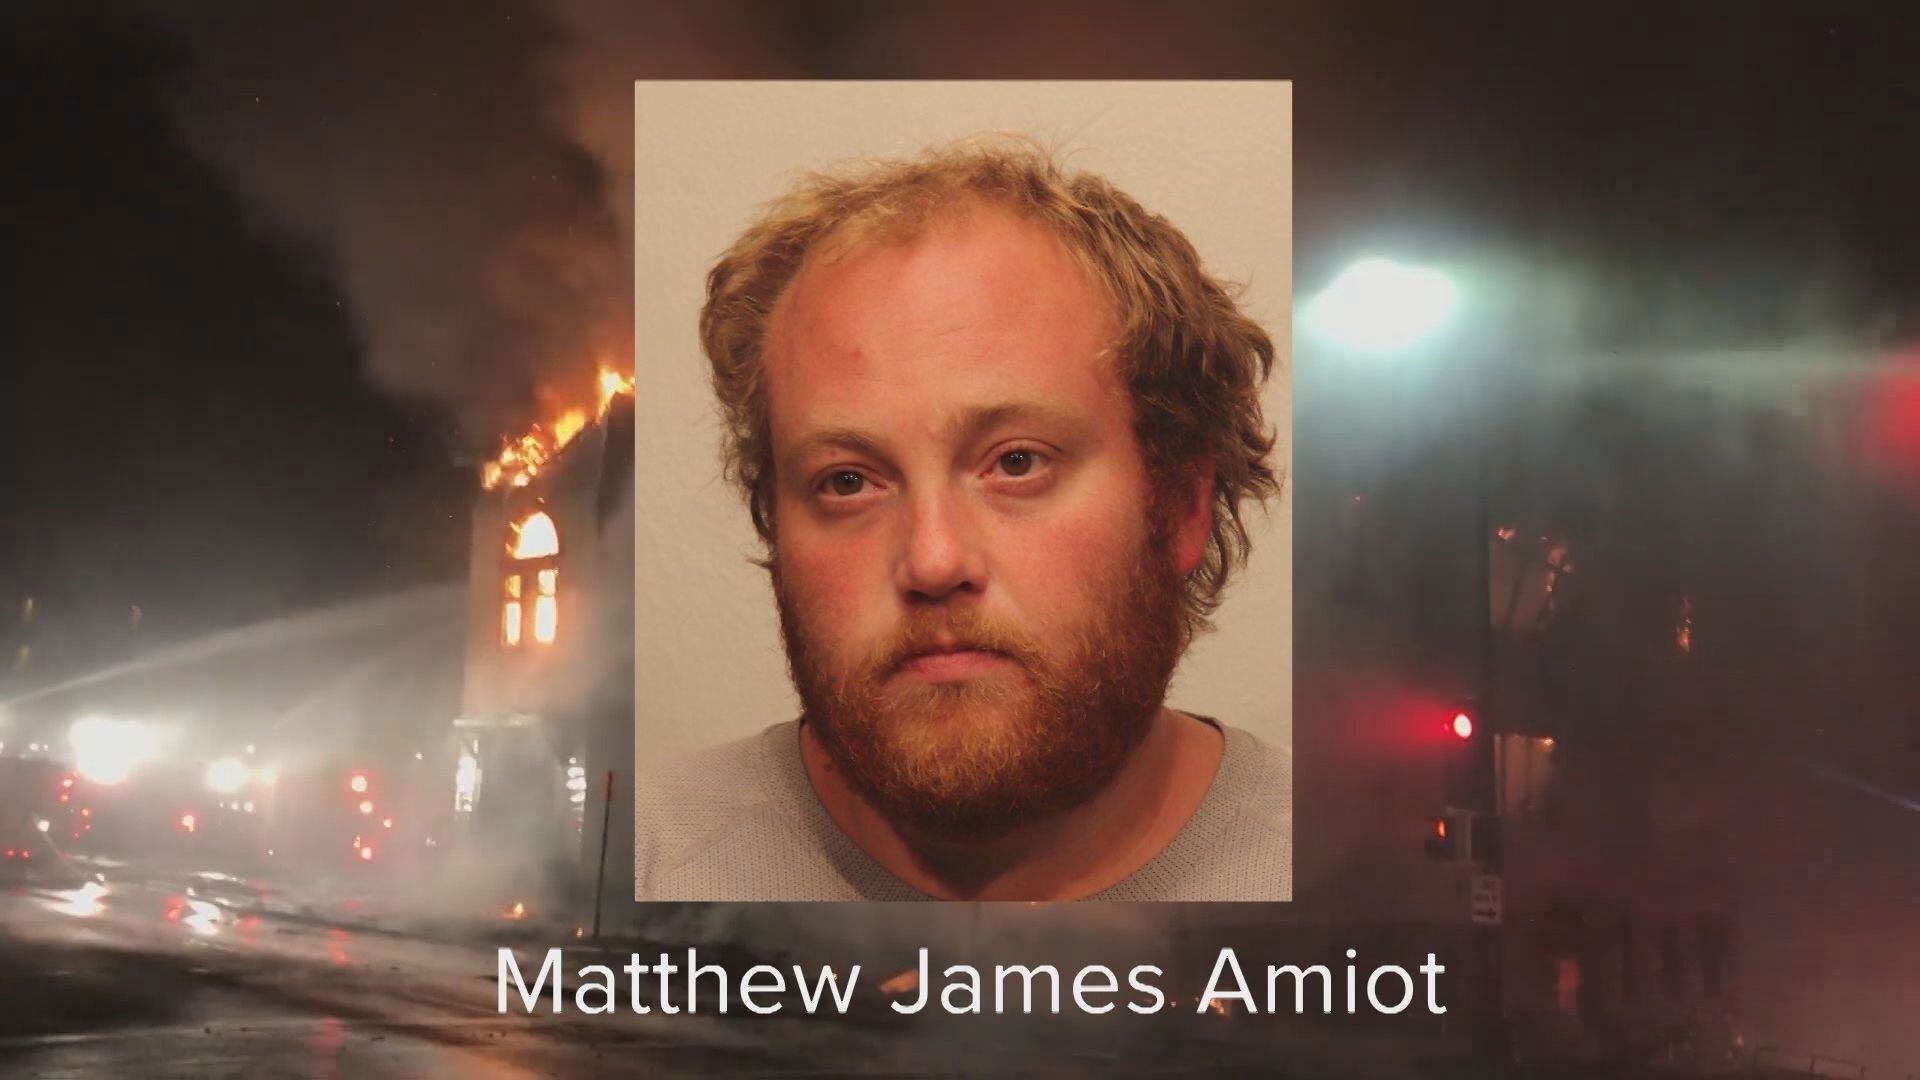 Matthew Amiot is charged with negligent fire.